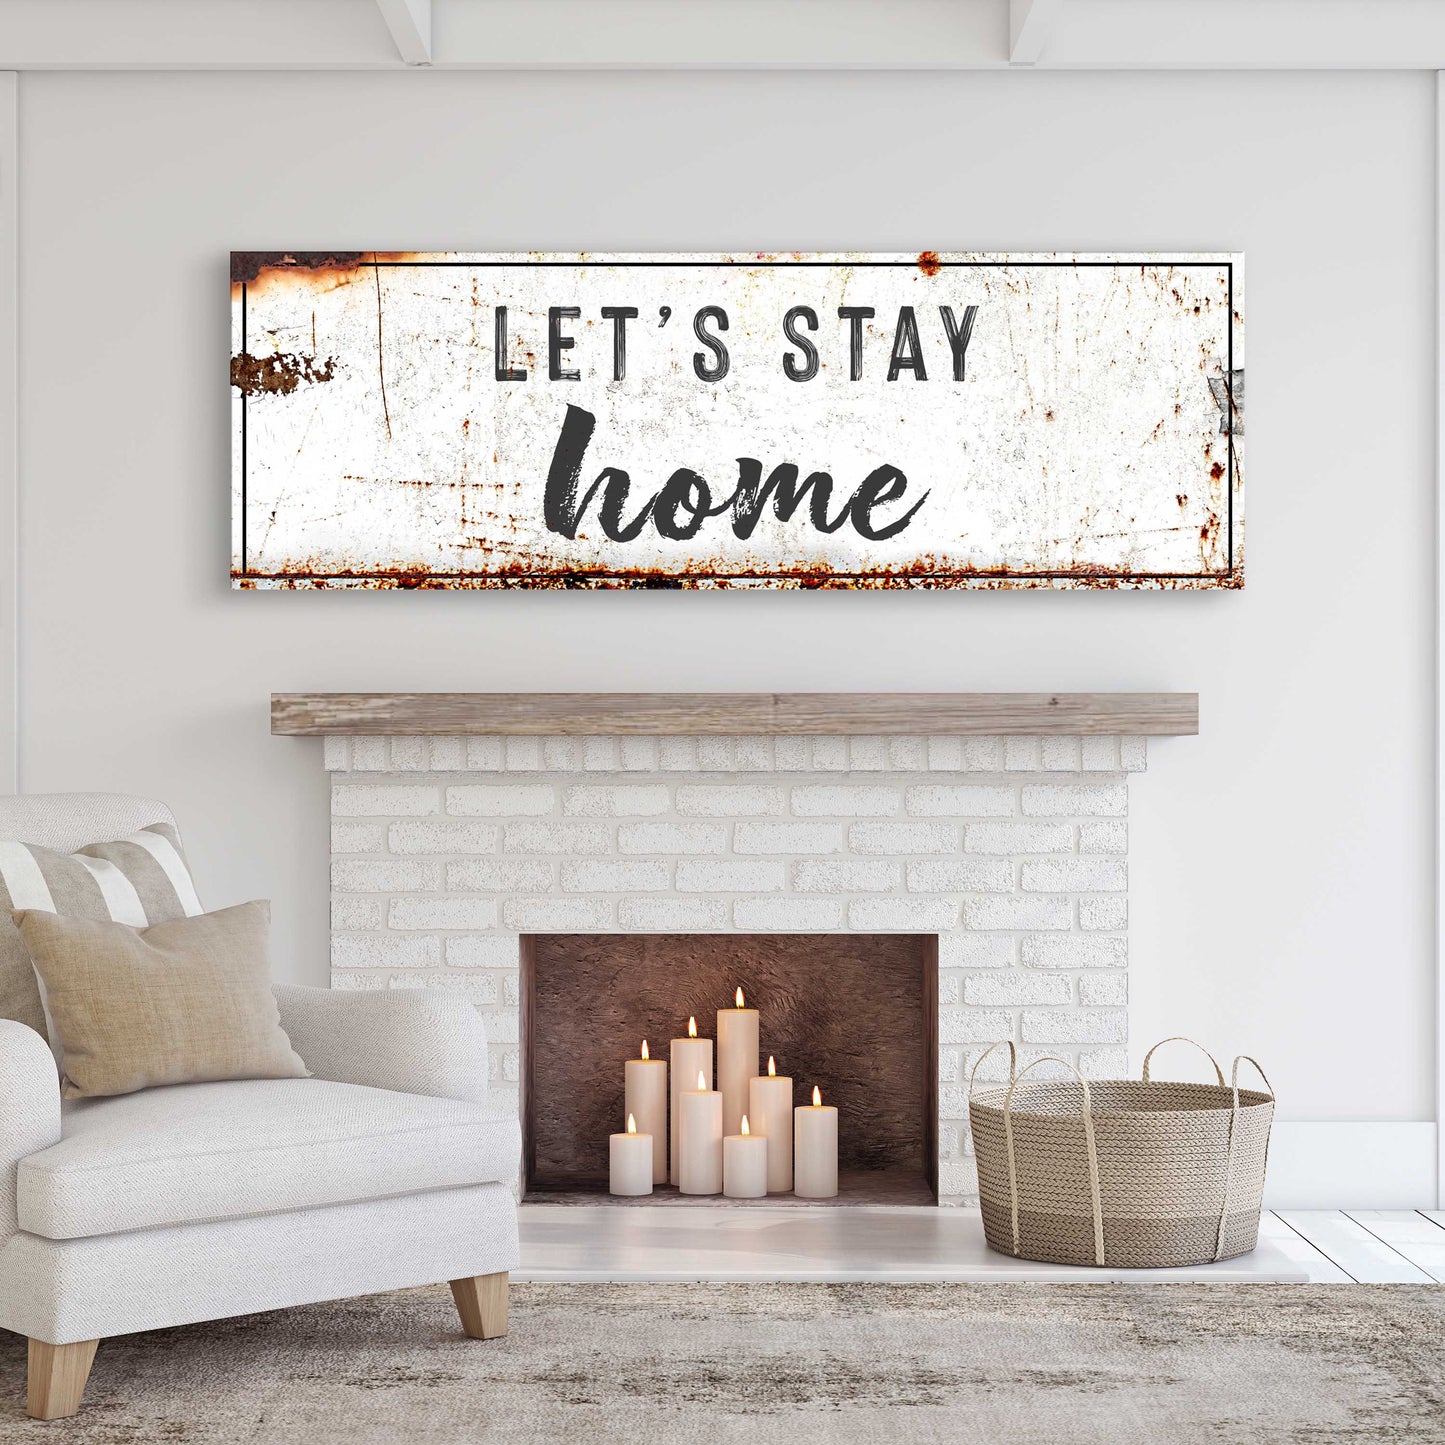 Let's Stay Home Sign - Image by Tailored Canvases